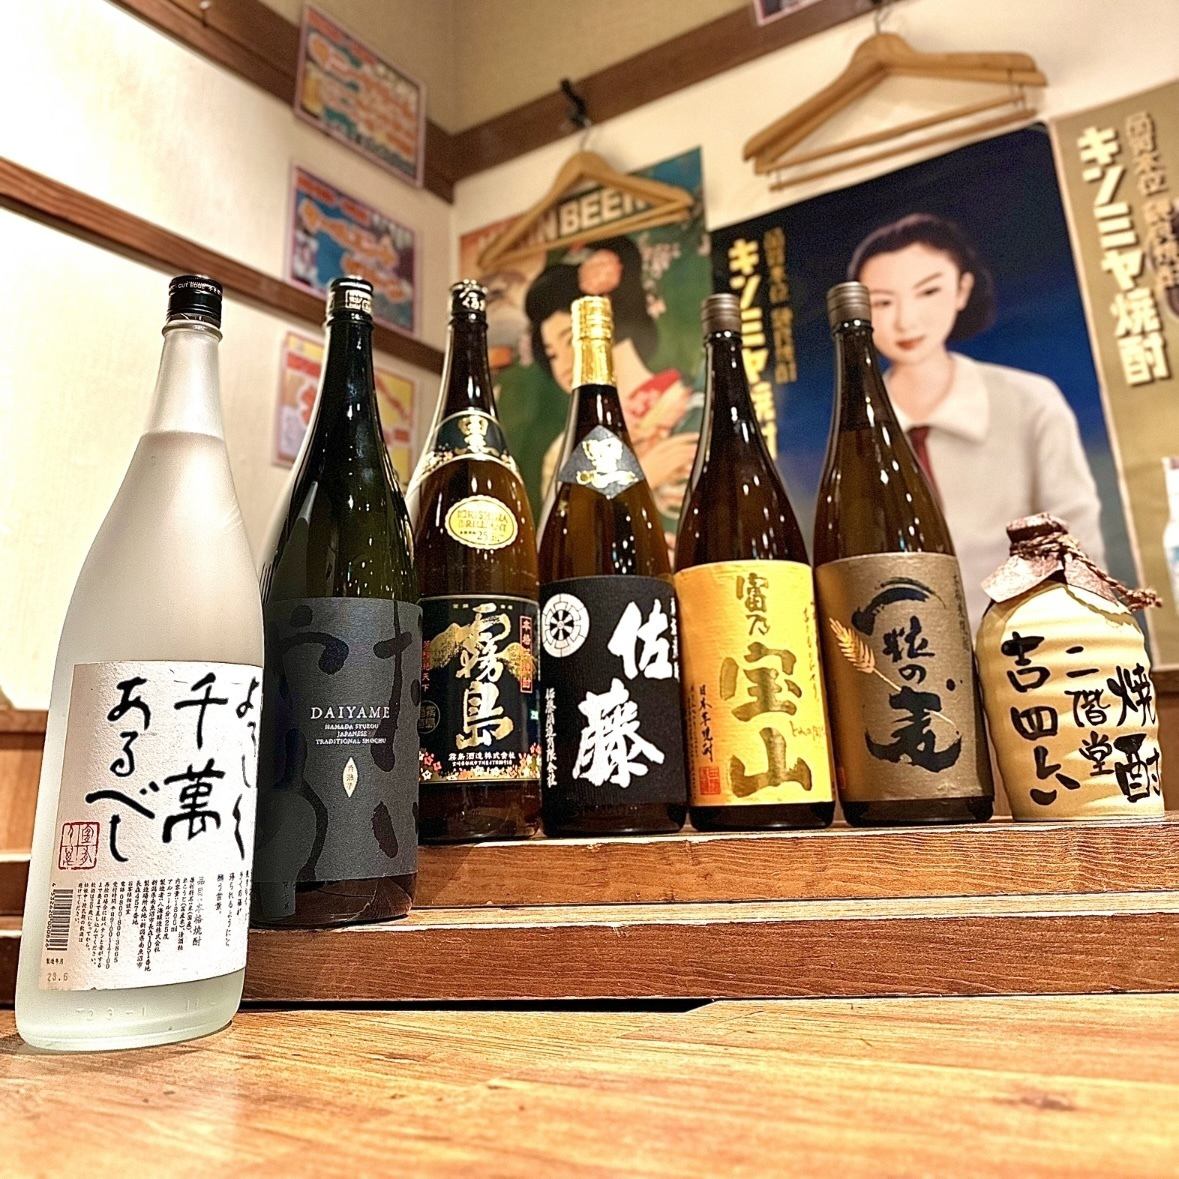 From standard to rare local sake, based on the motto “Delicious sake for delicious food”